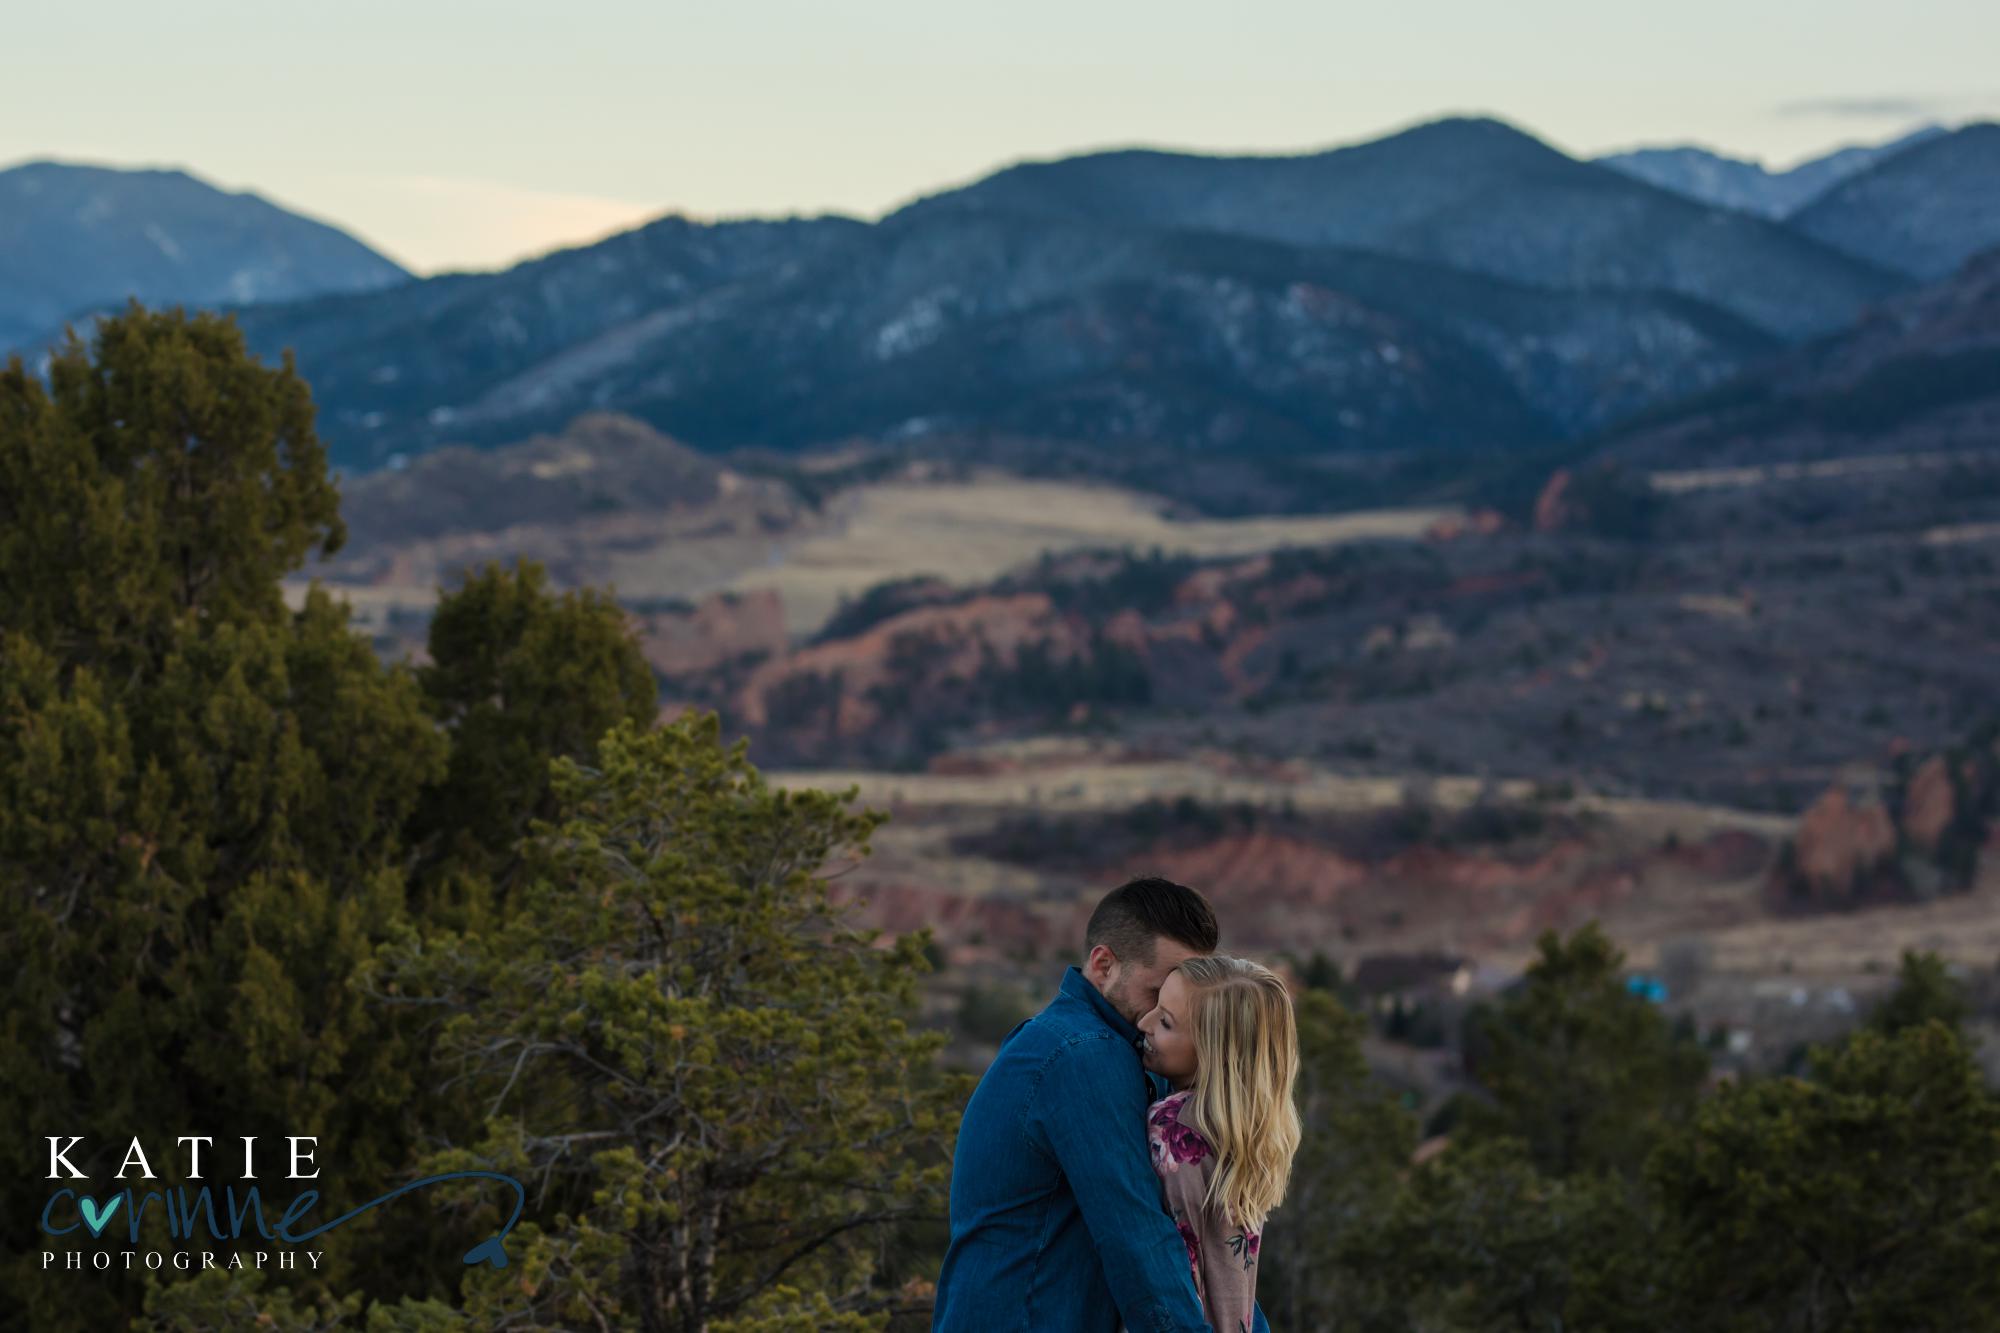 Colorado Springs couple embraces in front of Rocky Mountain landscape